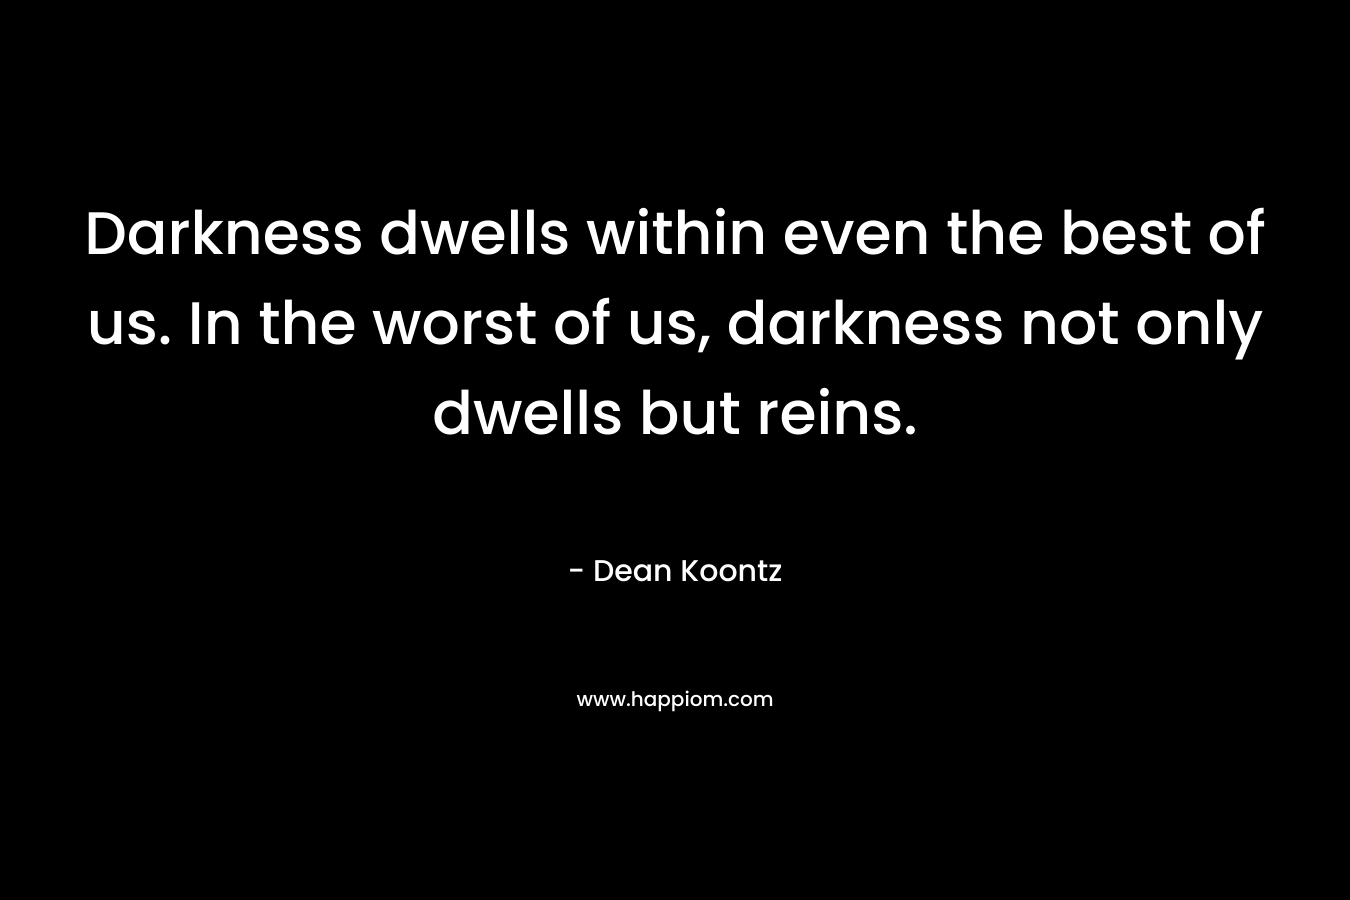 Darkness dwells within even the best of us. In the worst of us, darkness not only dwells but reins.